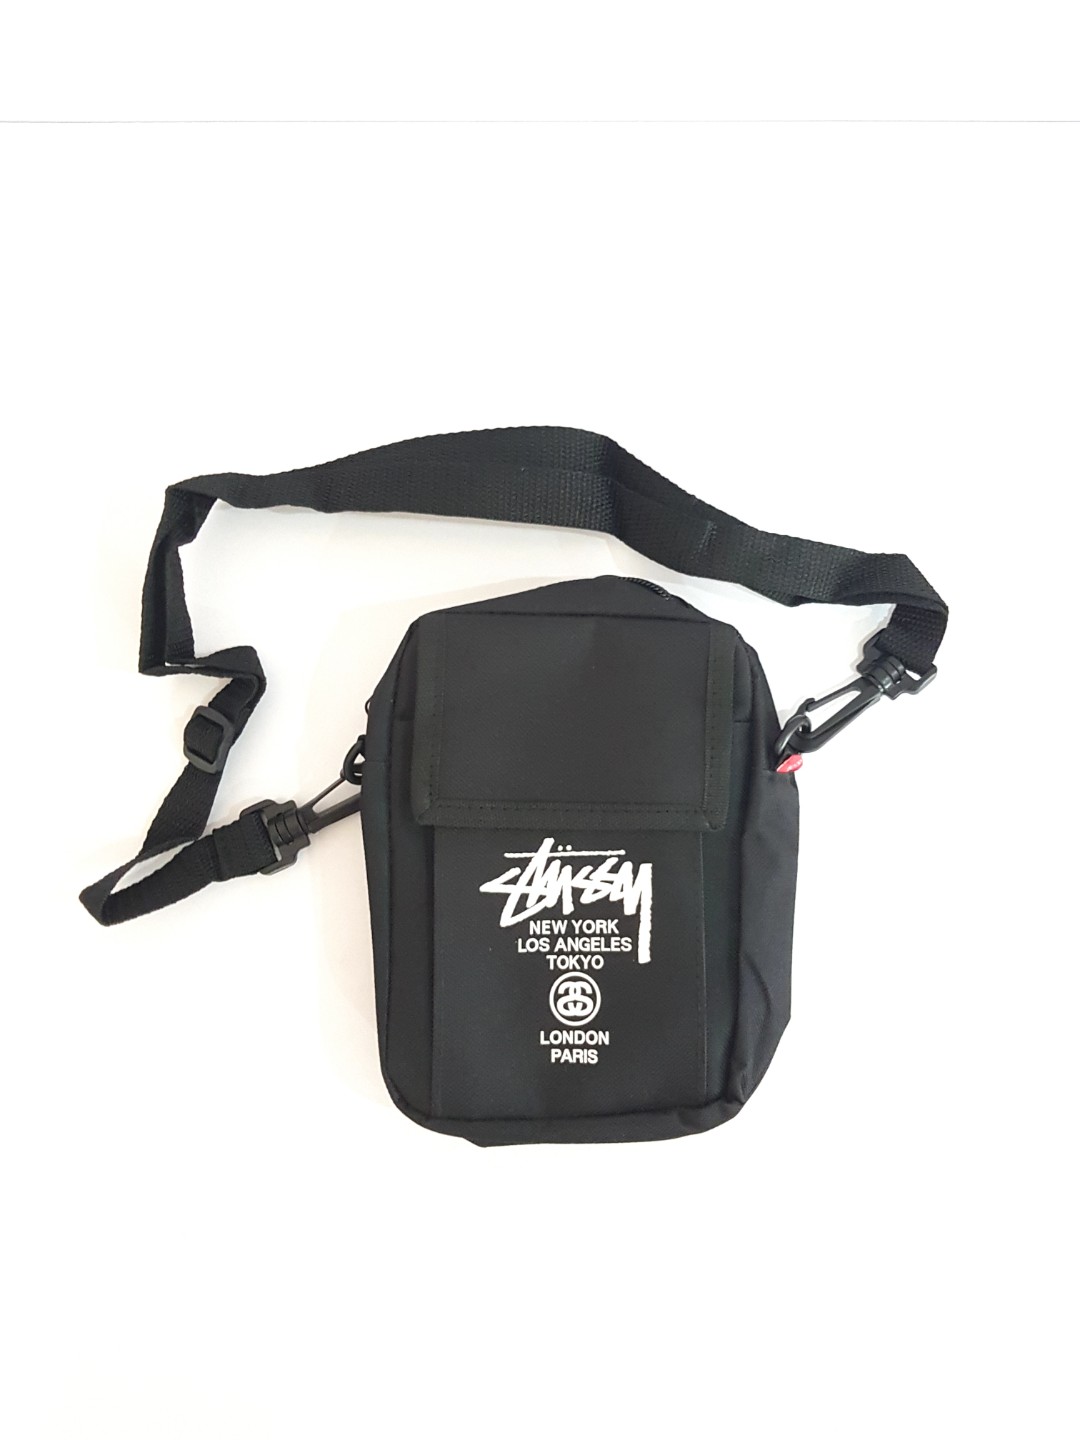 dickies small backpack